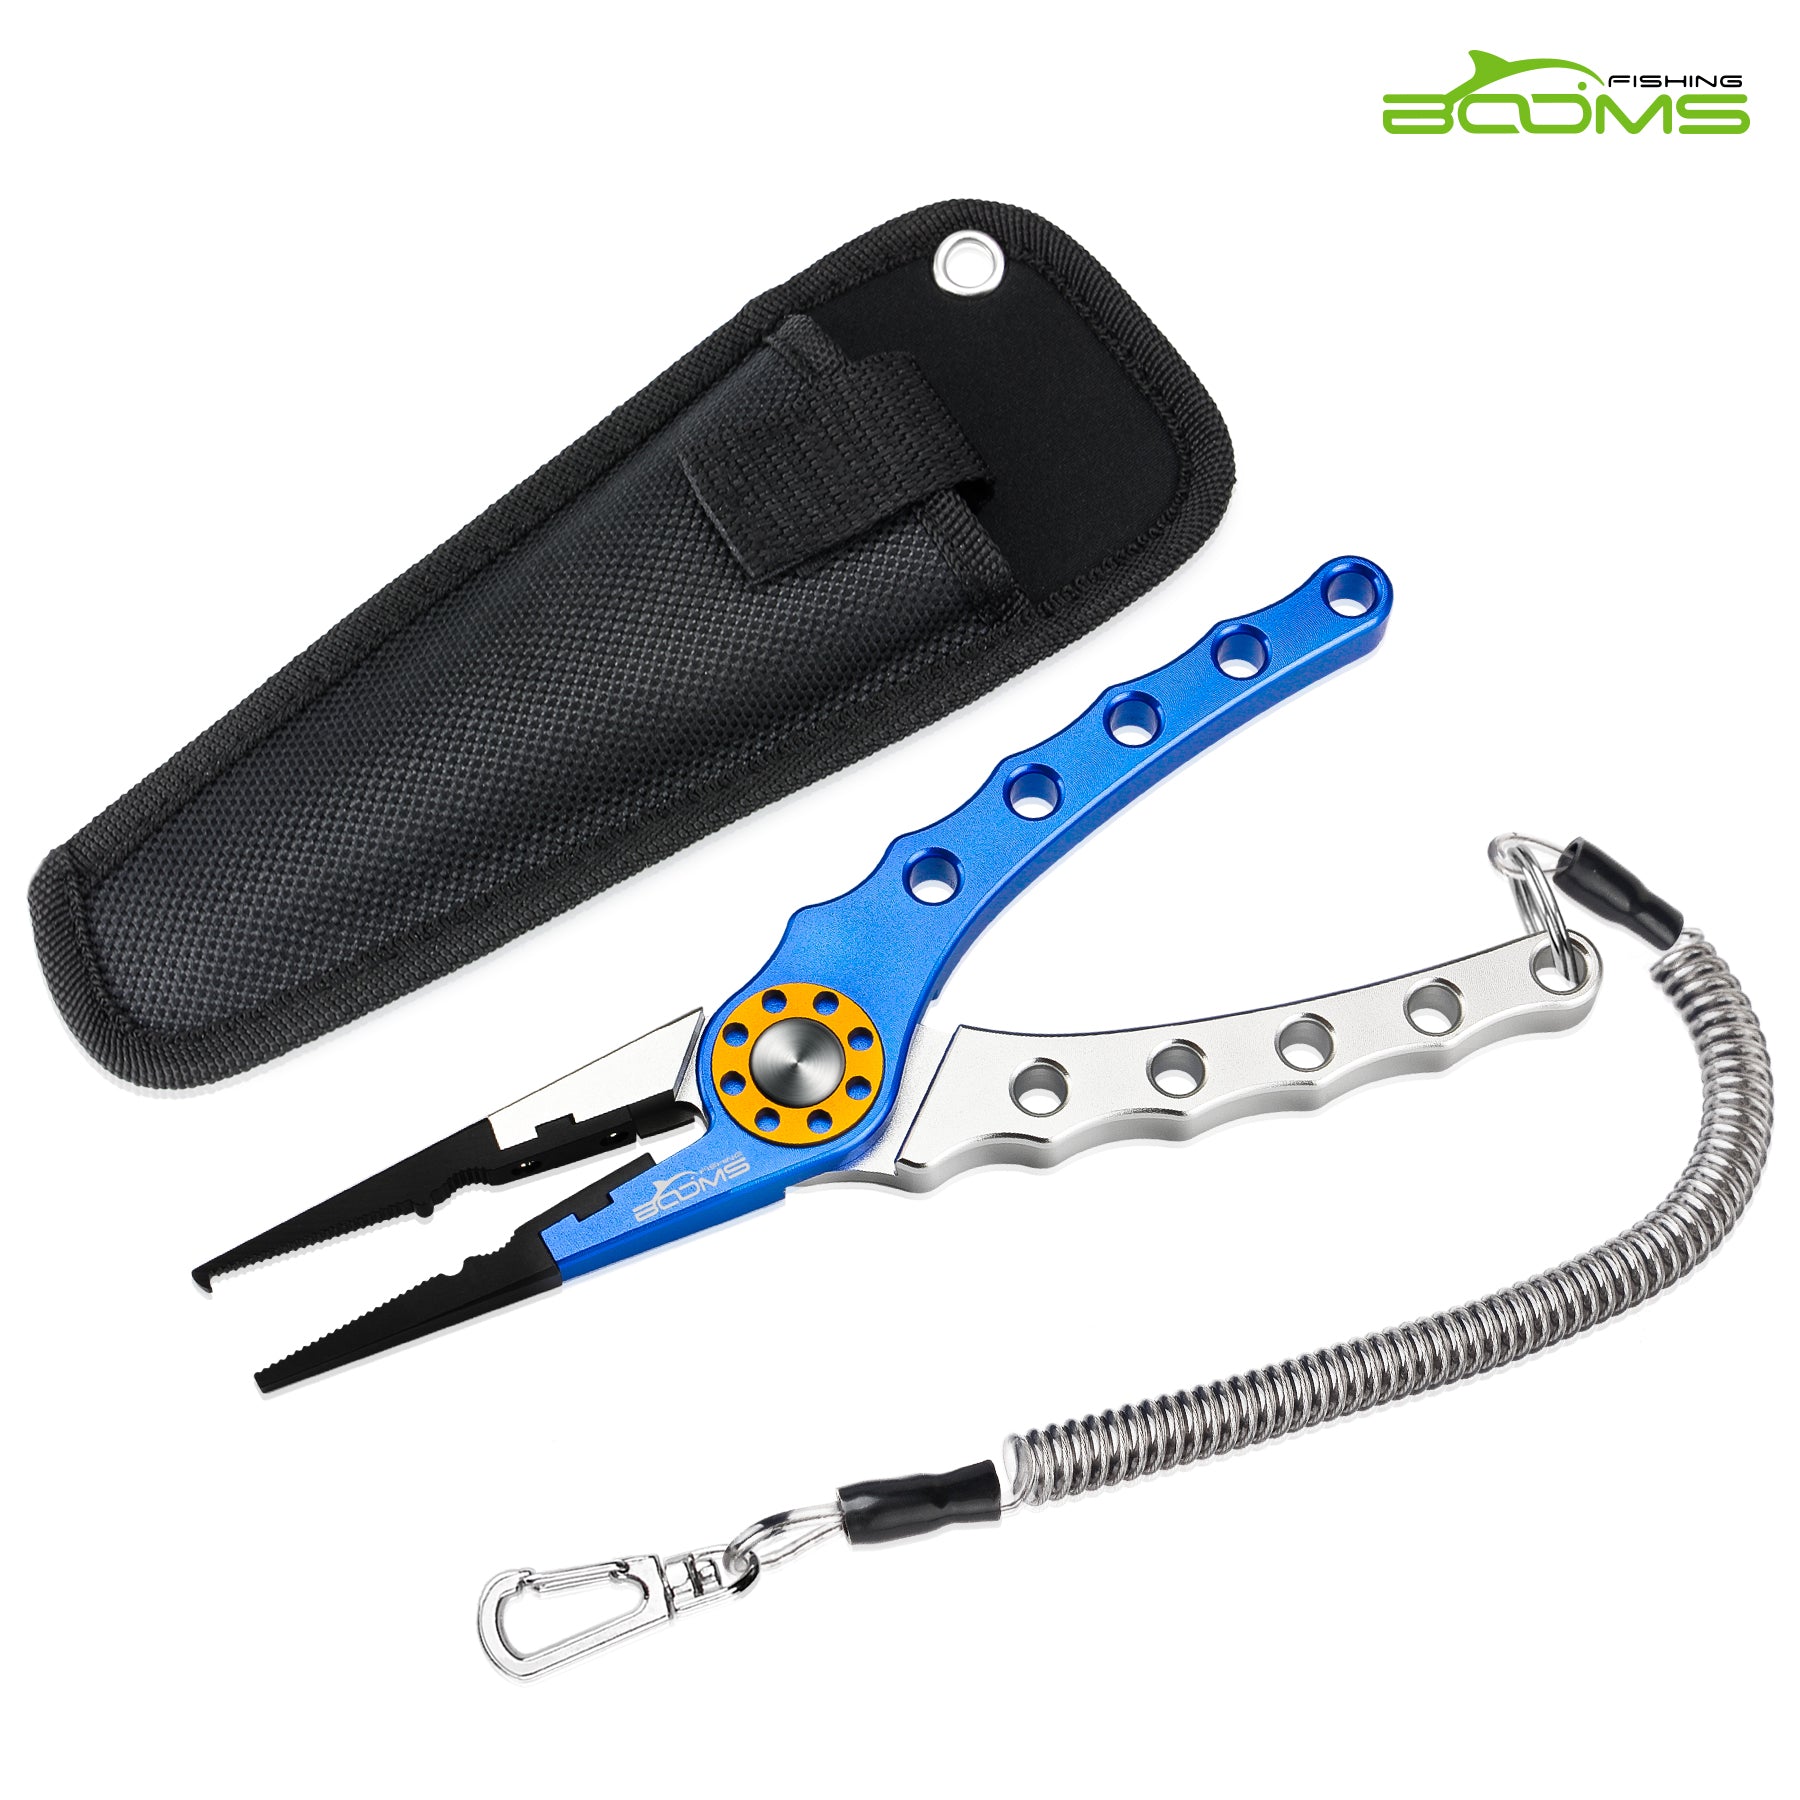 X01 Aluminum Fishing Pliers with Lanyard and Sheath – Booms